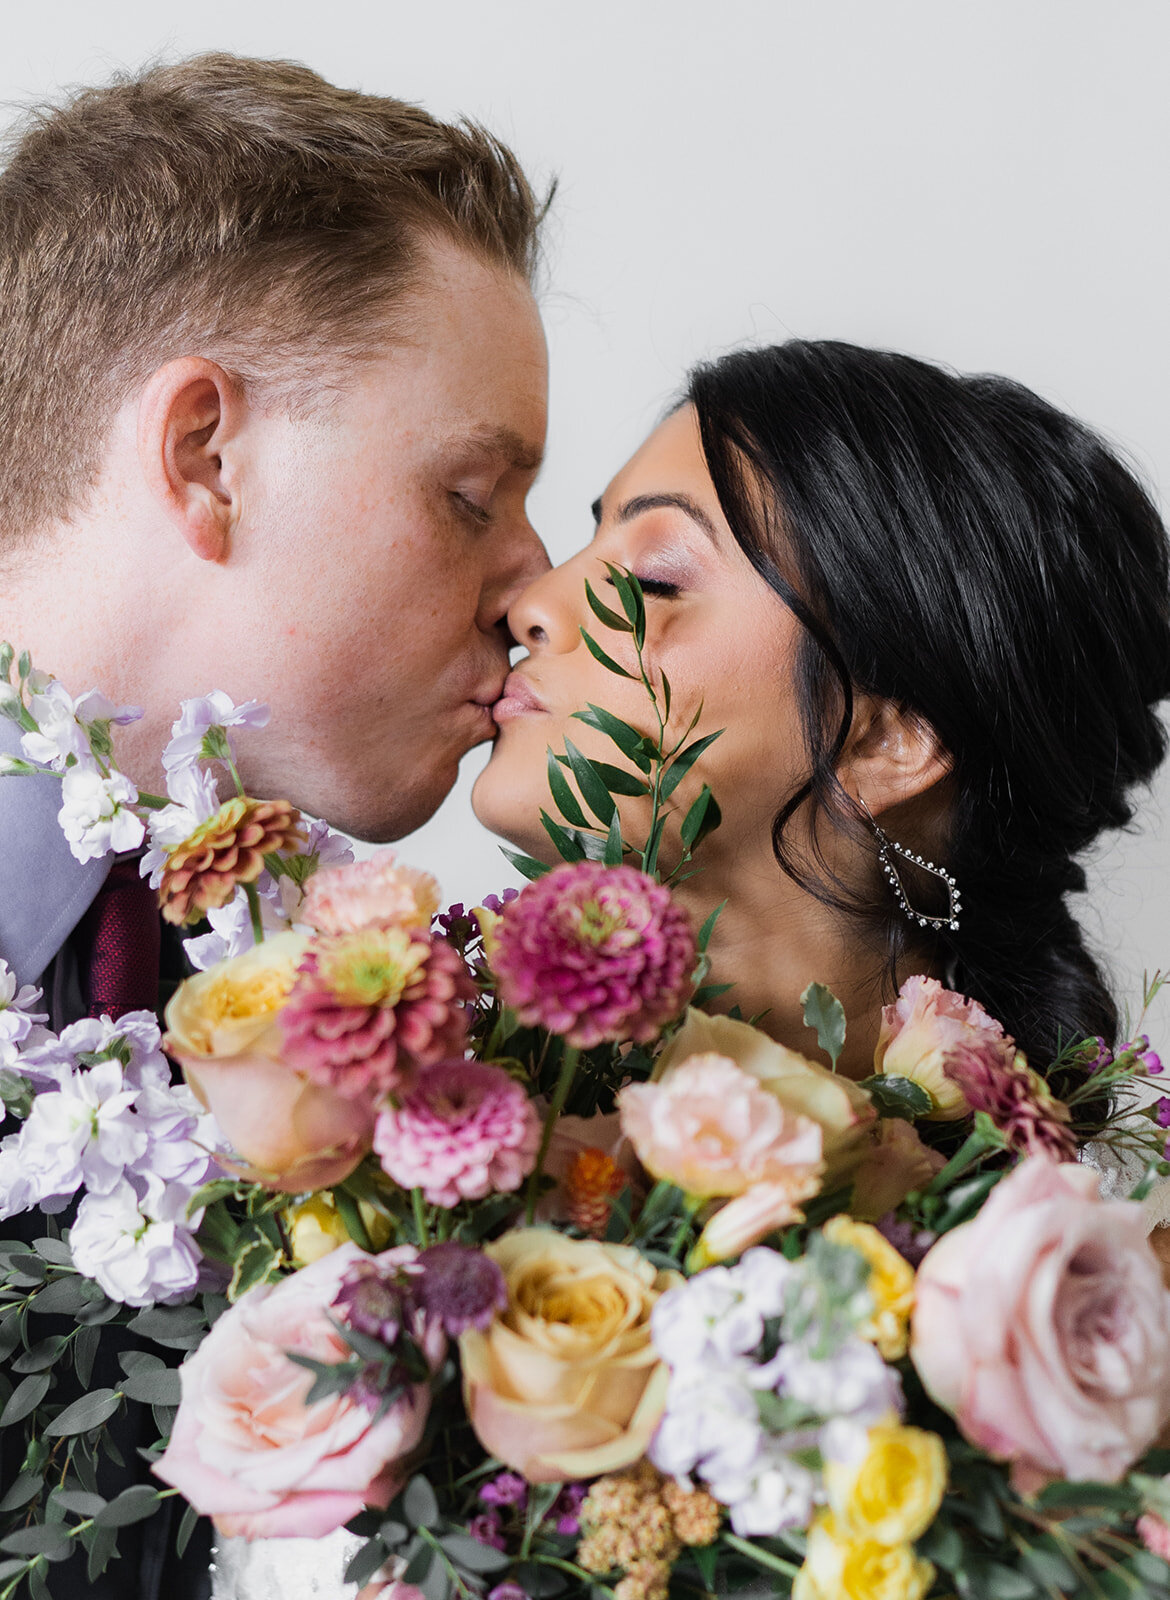 couple kissing behind the bride's bouquet